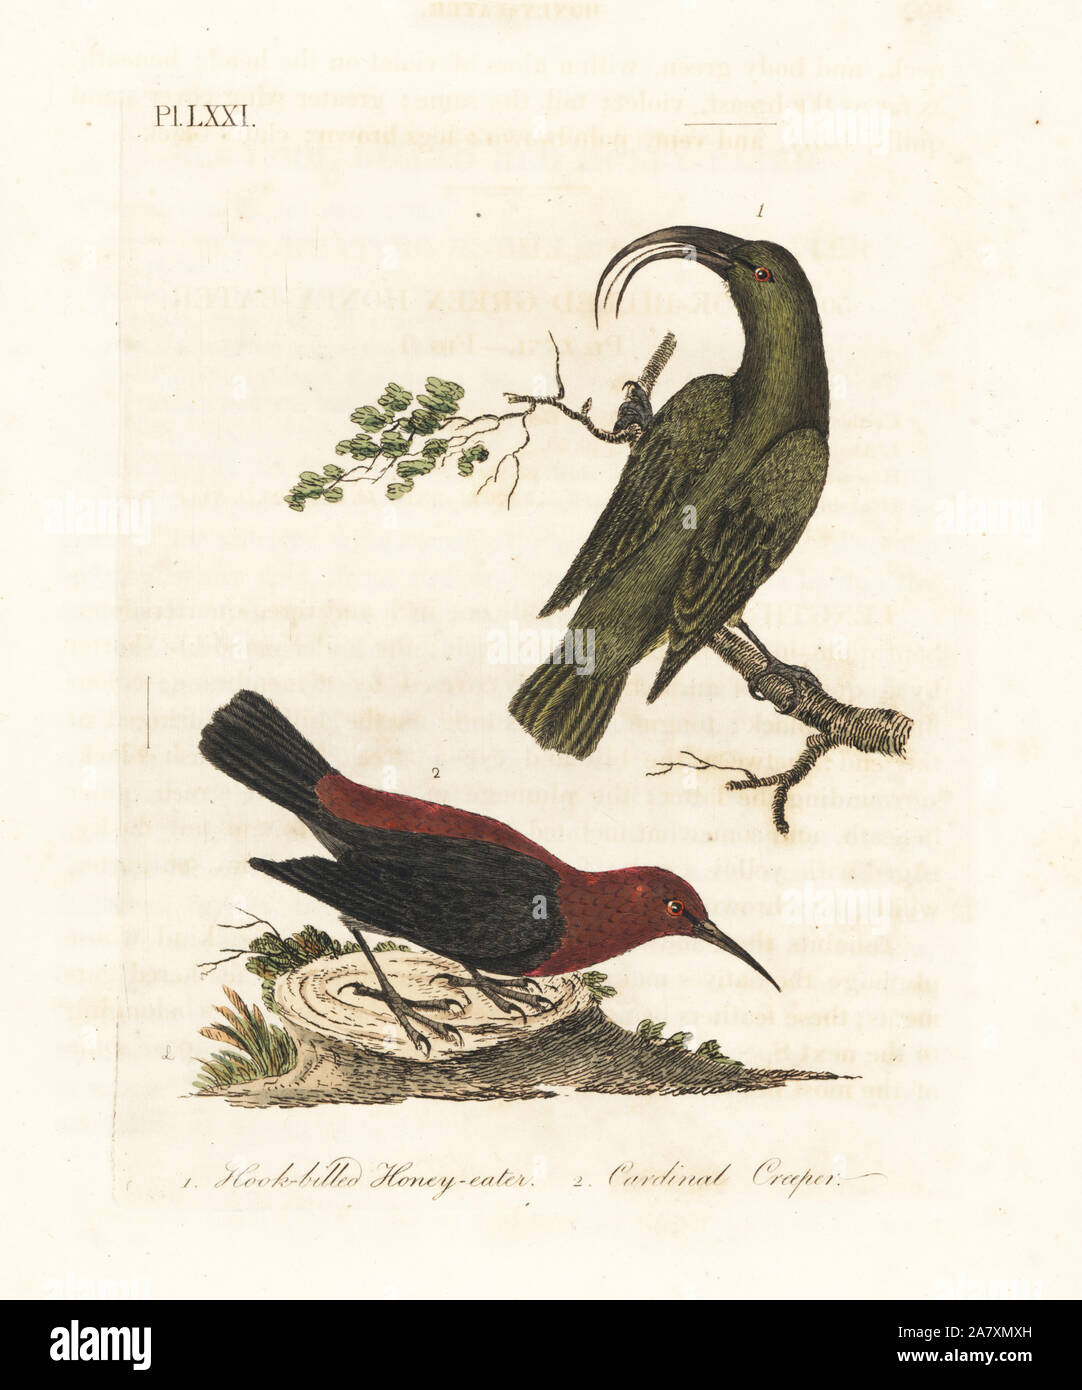 Lesser ʻakialoa, Hemignathus obscurus (extinct) and cardinal myzomela, Myzomela cardinalis. (Hook-billed green honey-eater, Certhia obscura, native to Hawaii, and cardinal honey-eater, Certhia cardinalis, native to Tanna, Vanuatu.) Handcoloured copperplate drawn and engraved by John Latham from his own A General History of Birds, Winchester, 1822. Stock Photo